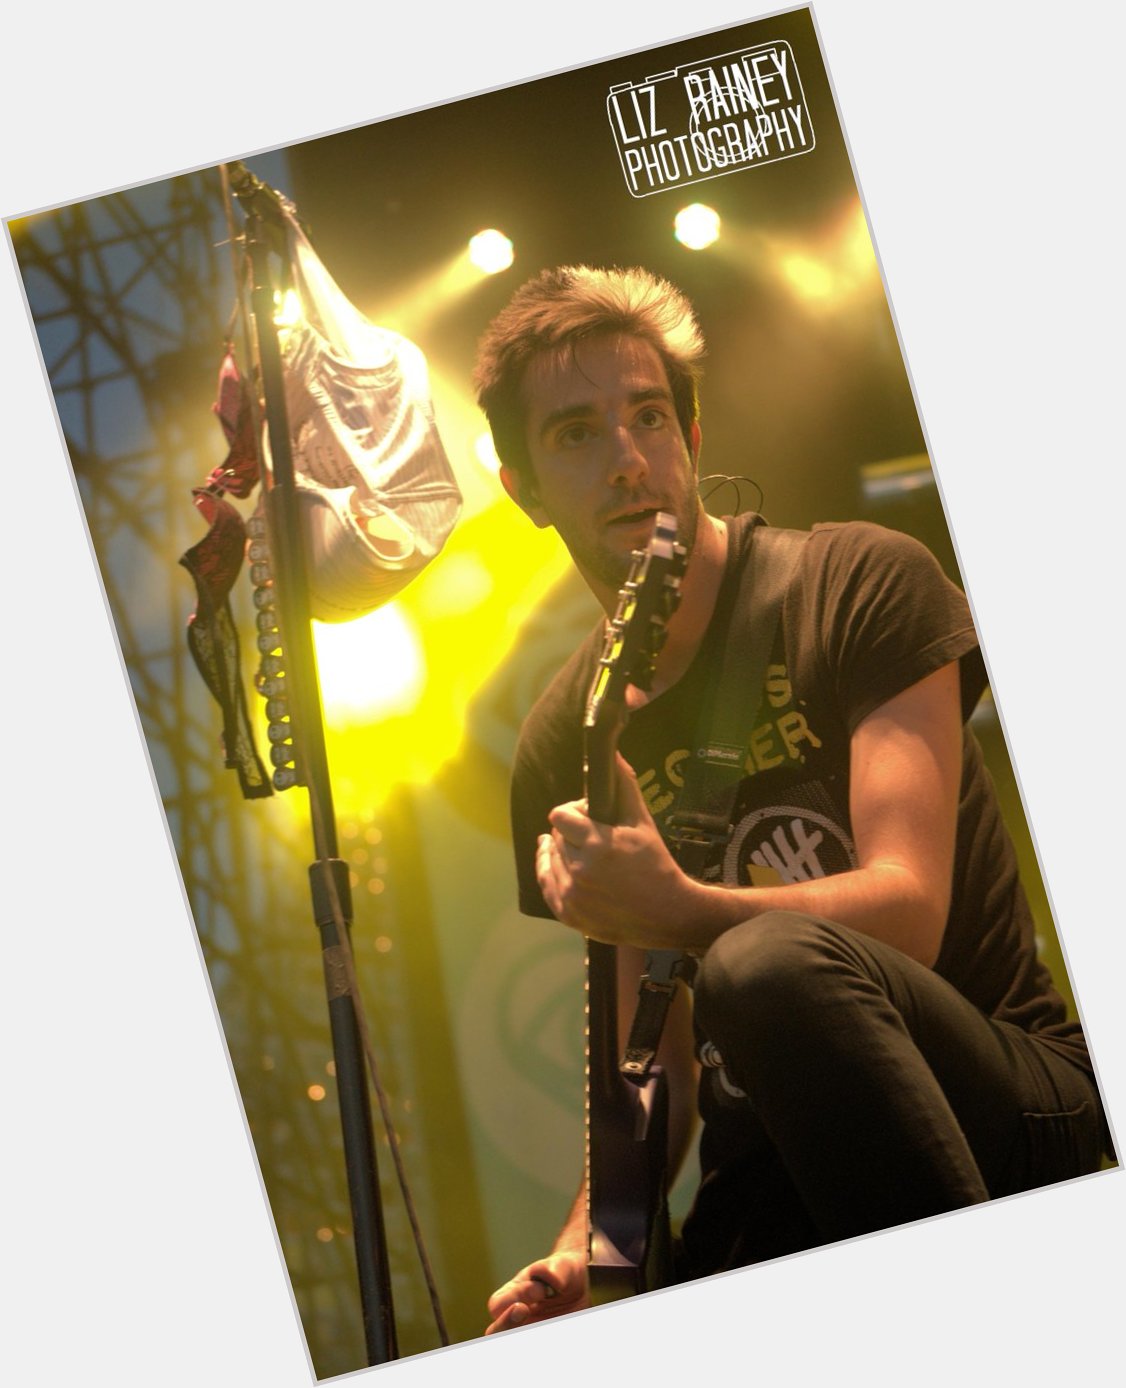 Happy (late) birthday to Jack Barakat
have no idea what you are staring but seems interesting. 